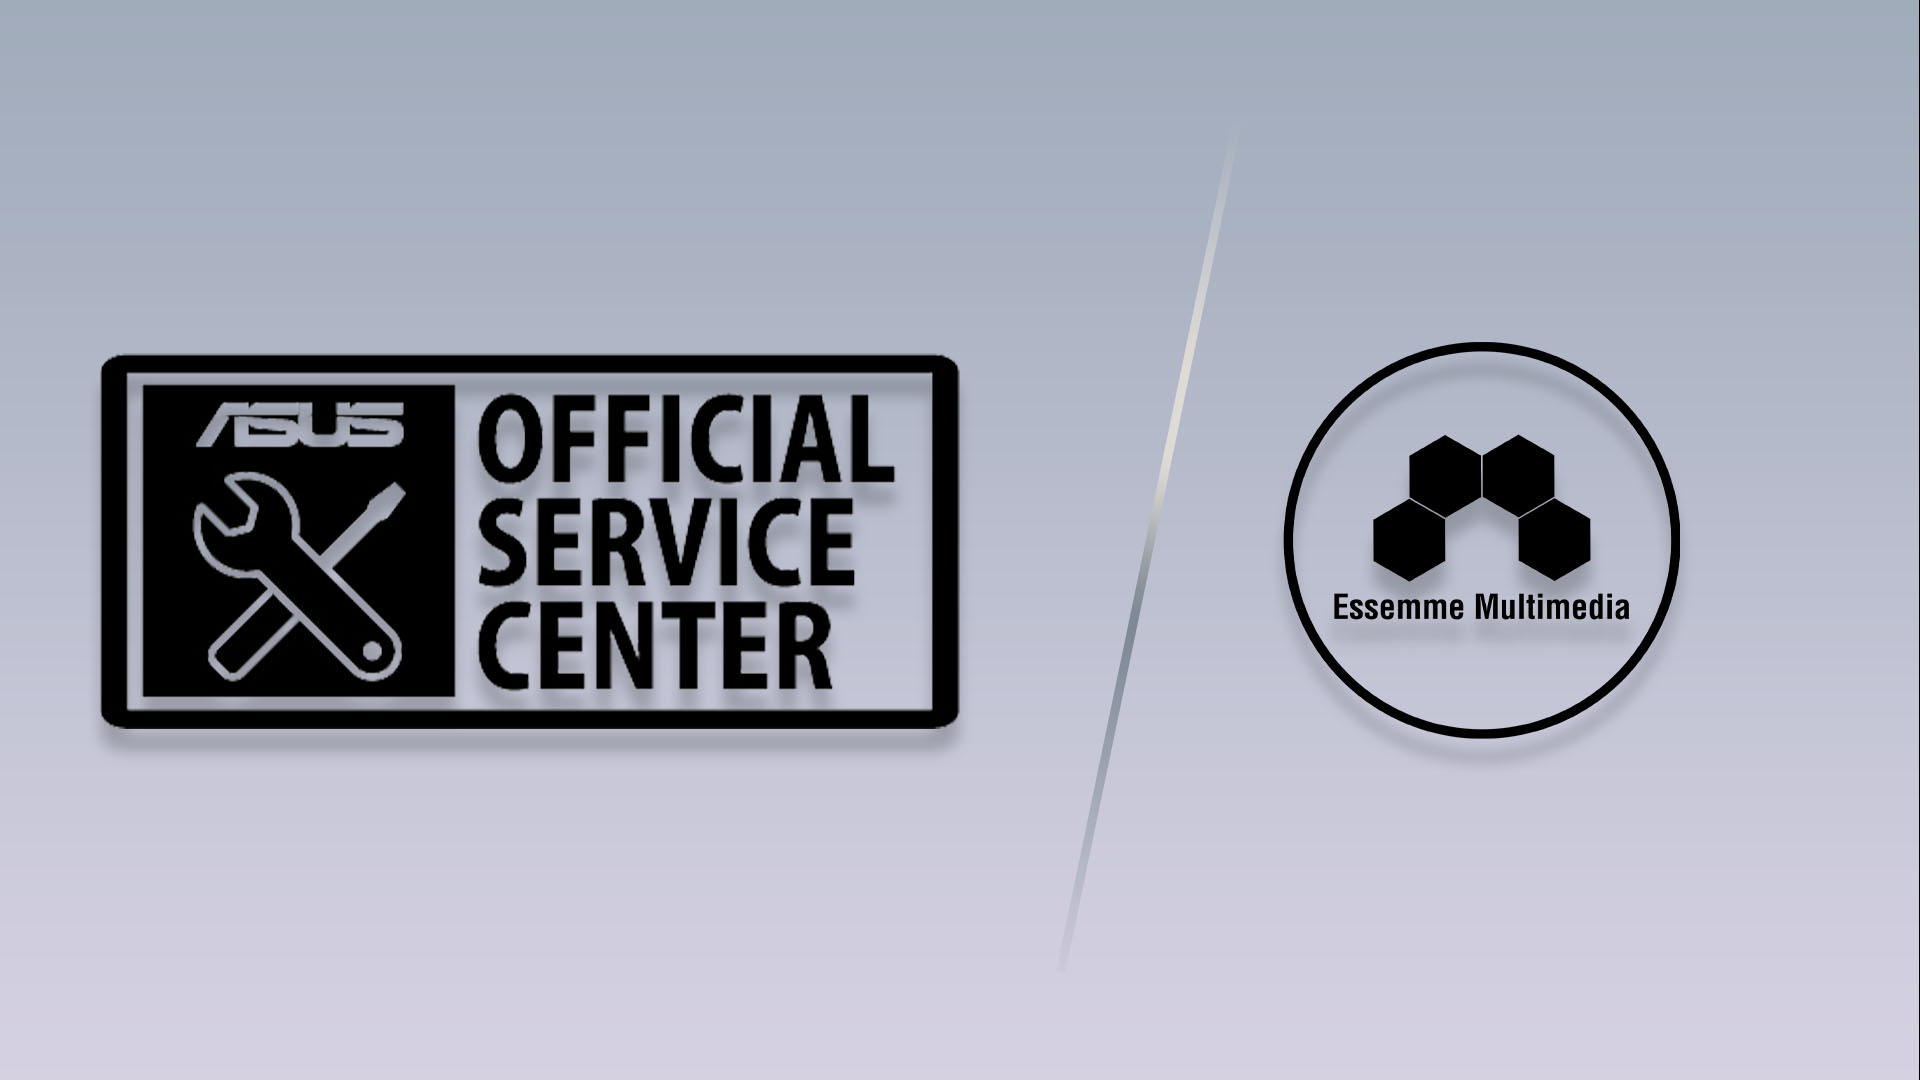 ASUS Official Service Center